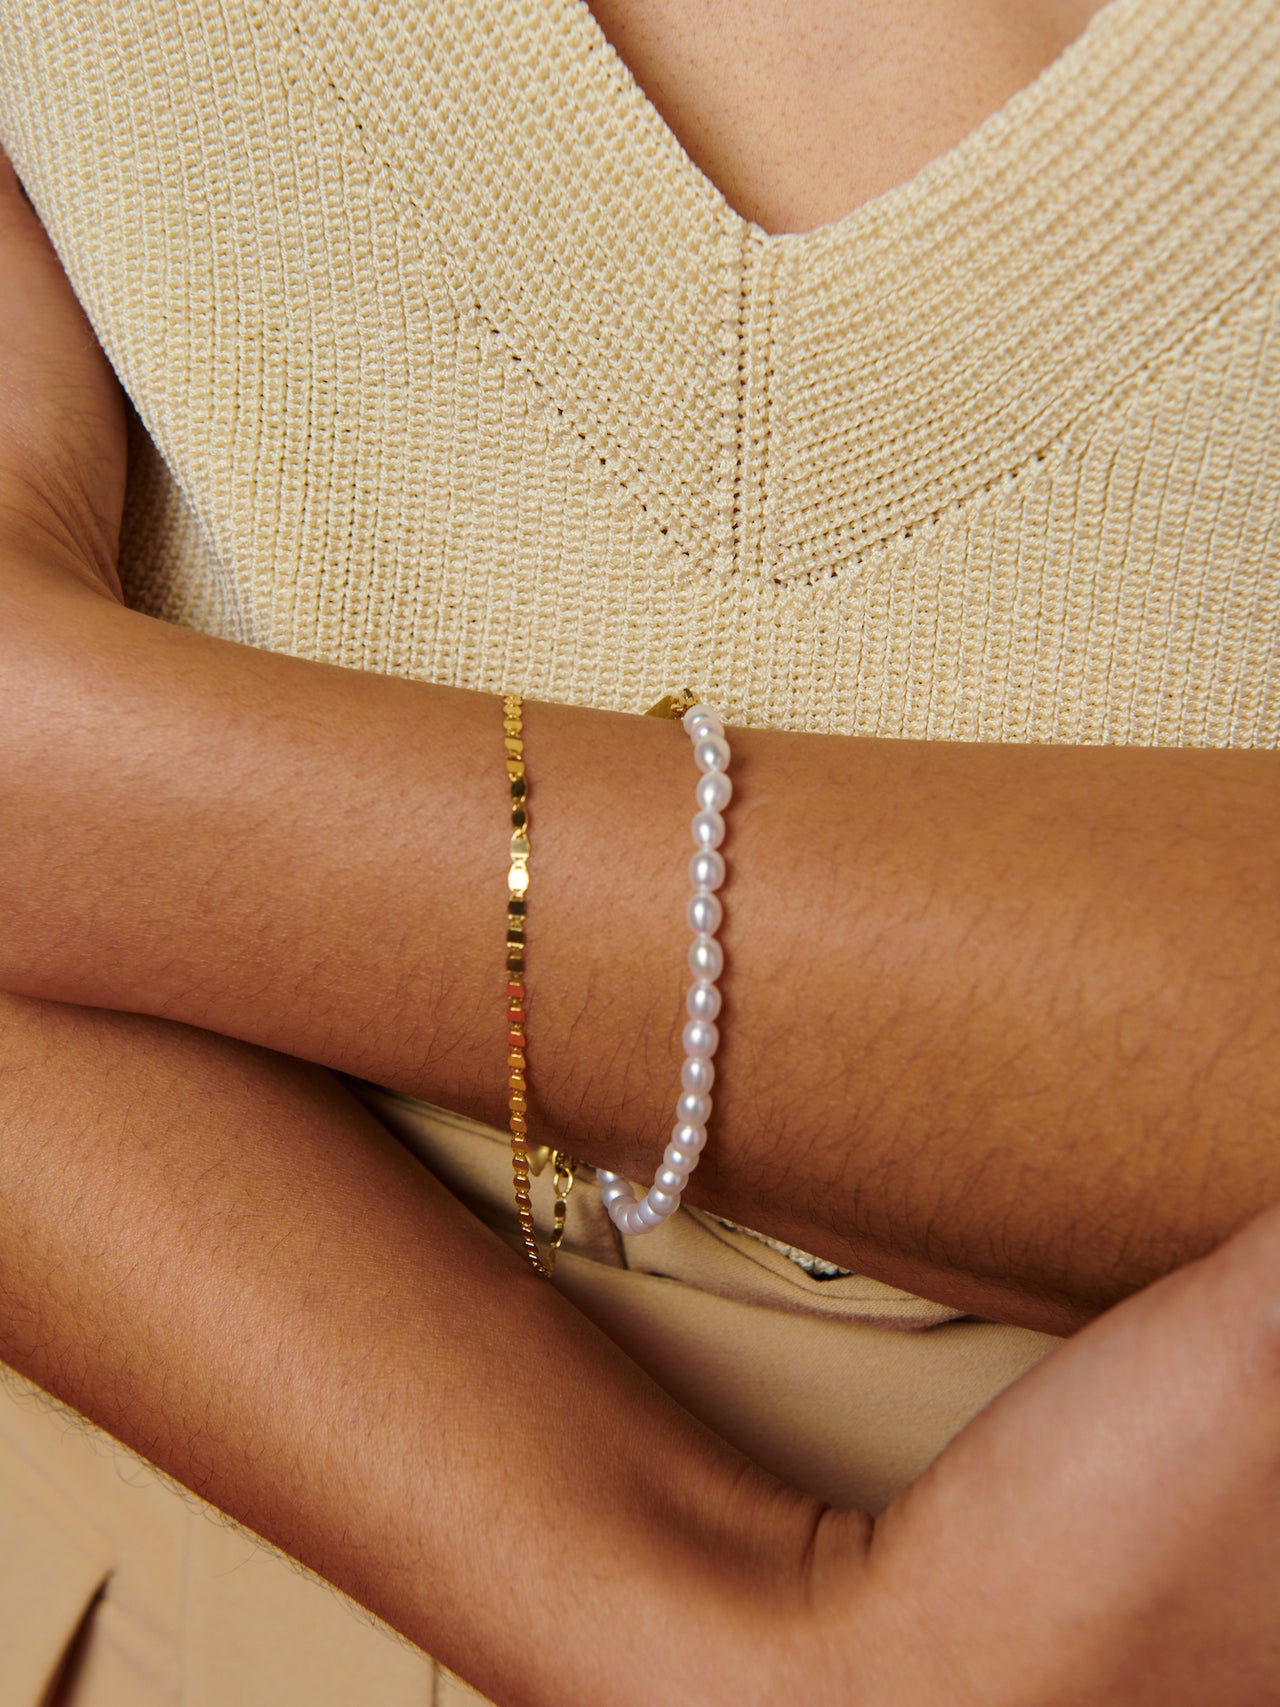 14kt Yellow Gold Freshwater Pearl Bracelet pictured on models wrist. 